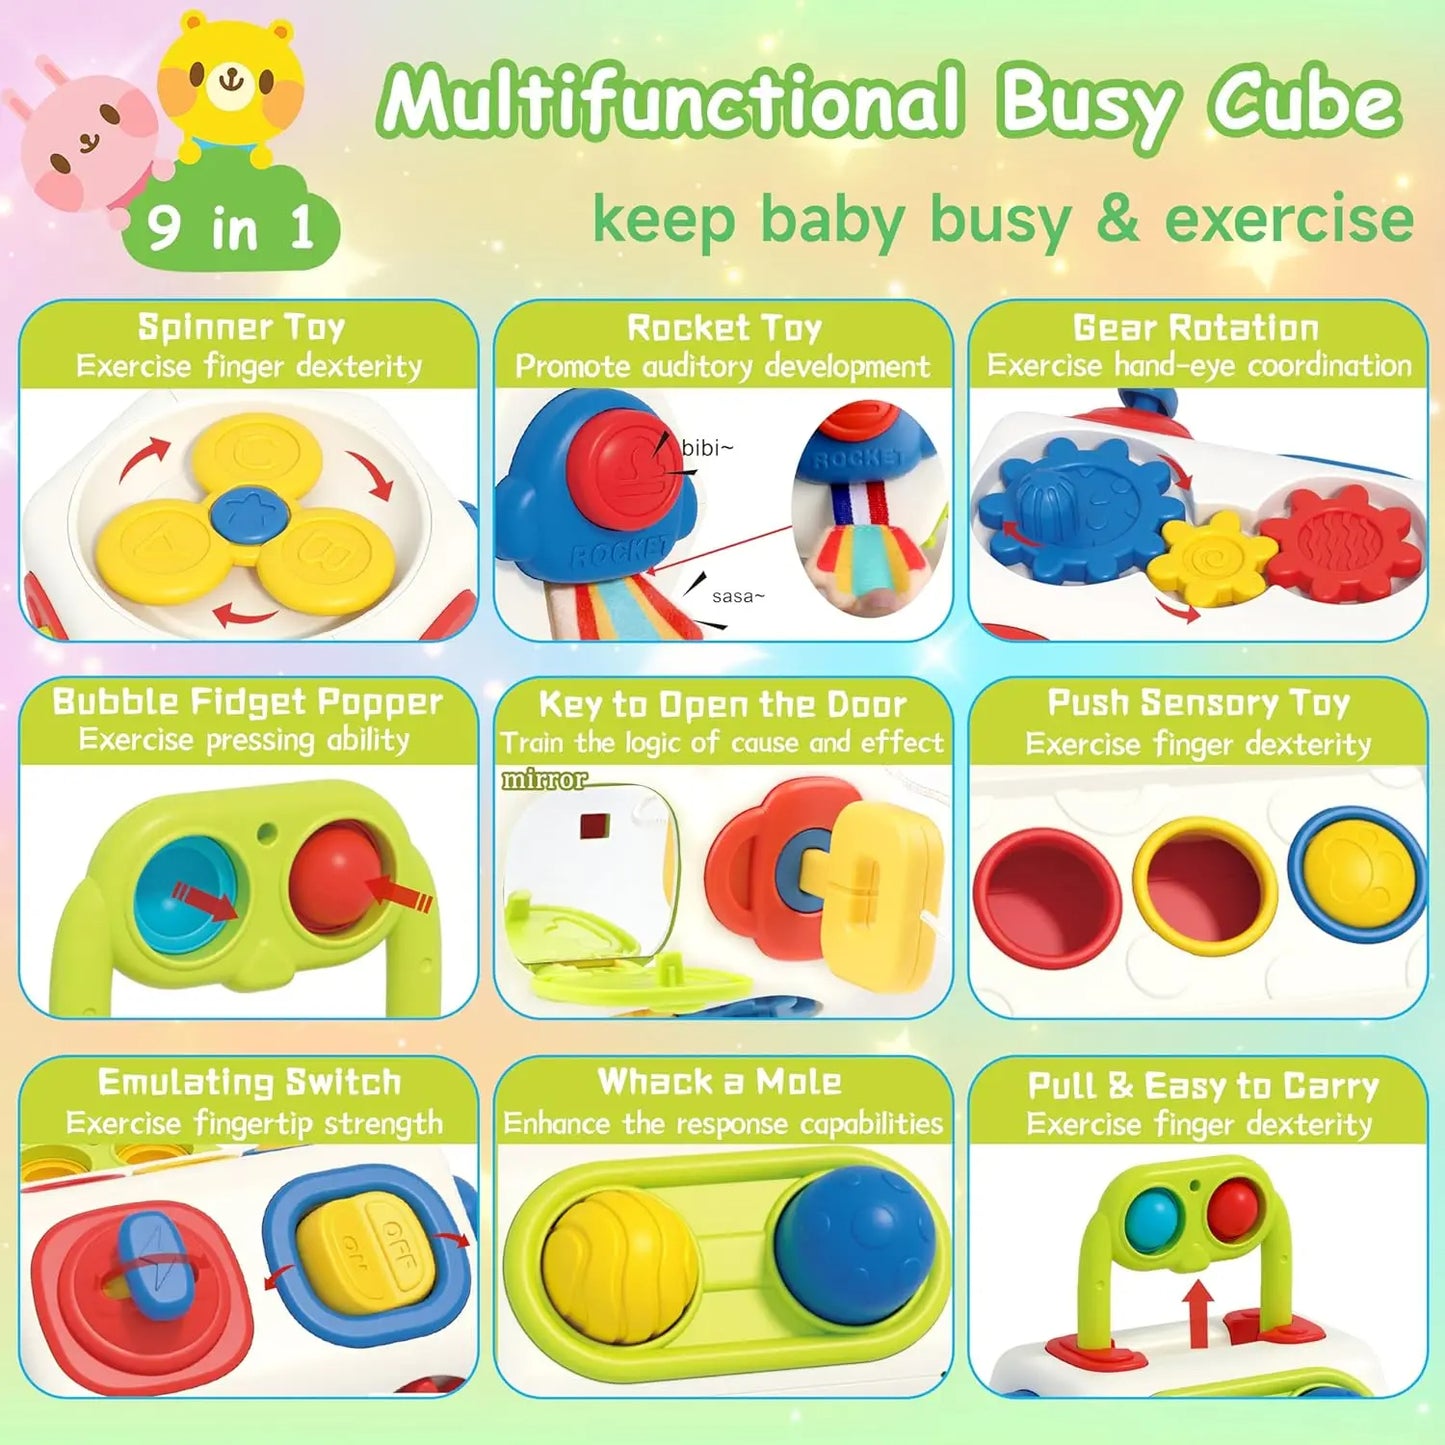 9 In 1 Busy Cube Baby & Toddler Toys Montessori Sensory Toys For Toddlers 1 2 3 Year Old Fidget Busy Board Learning Toys